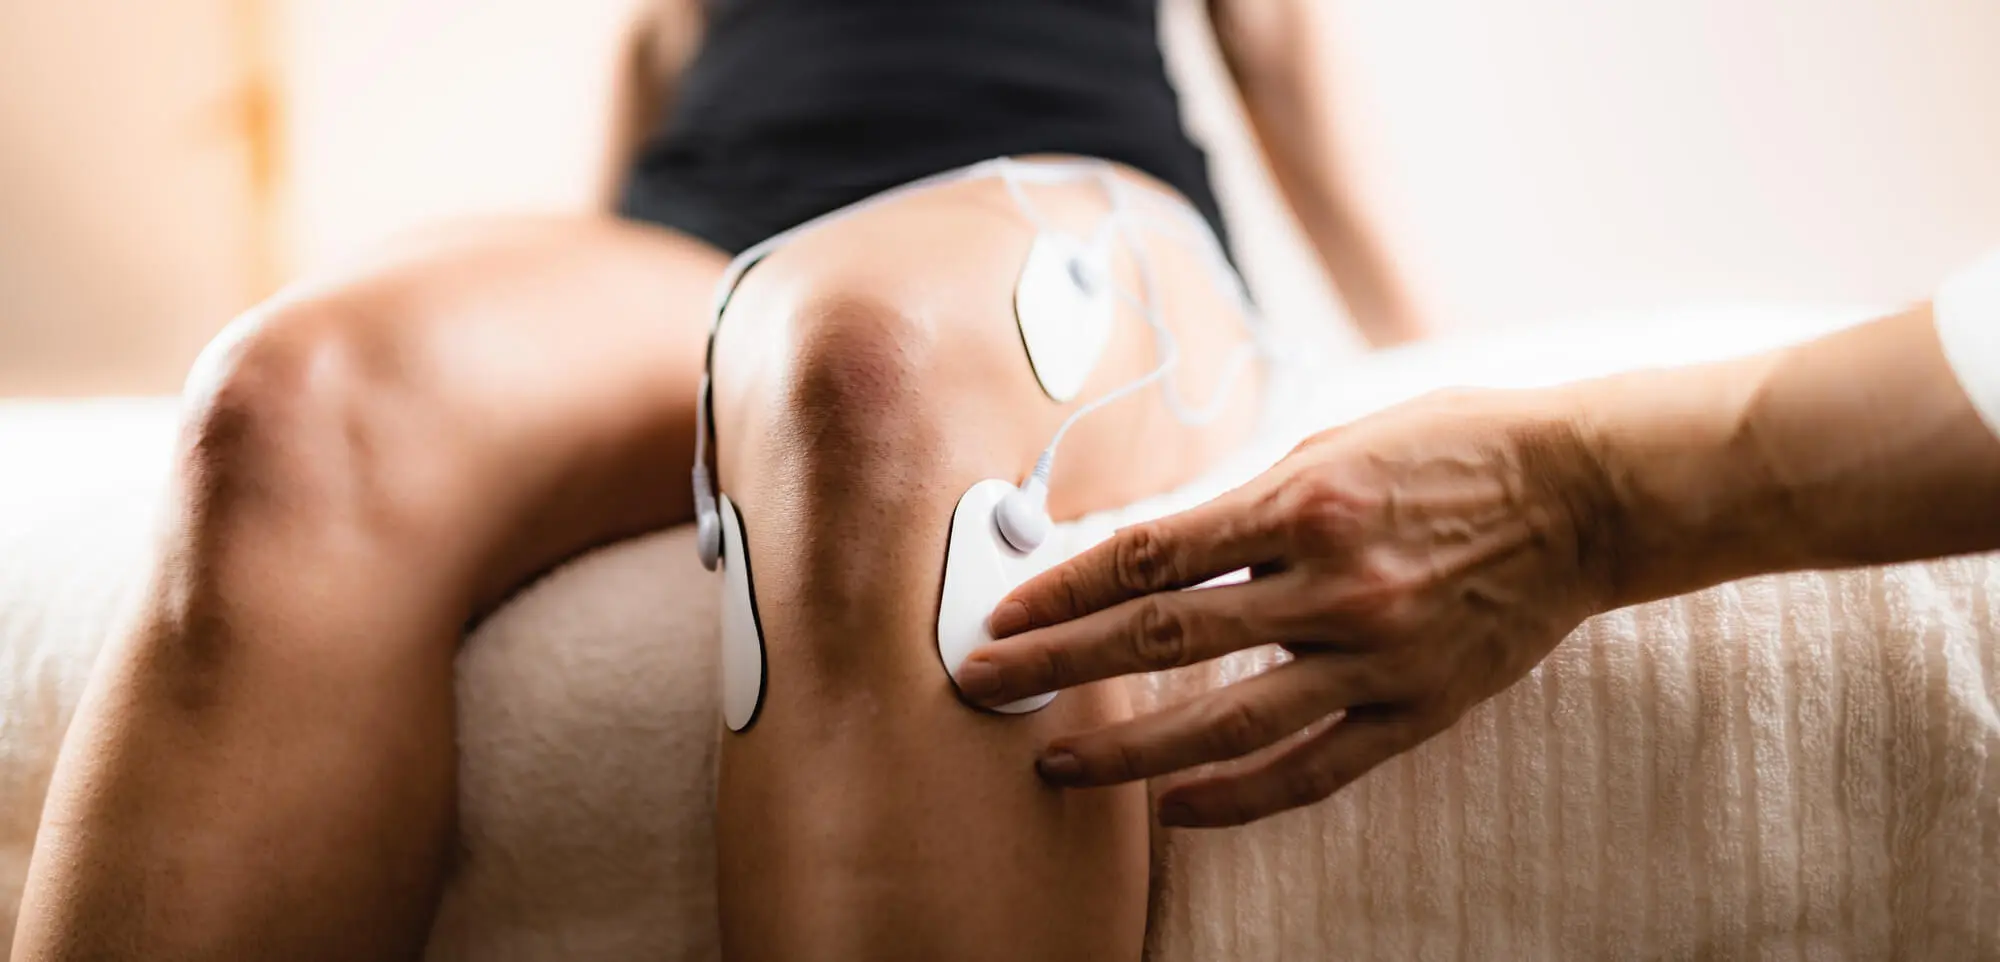 Types of Electrical Stimulation in Physical Therapy